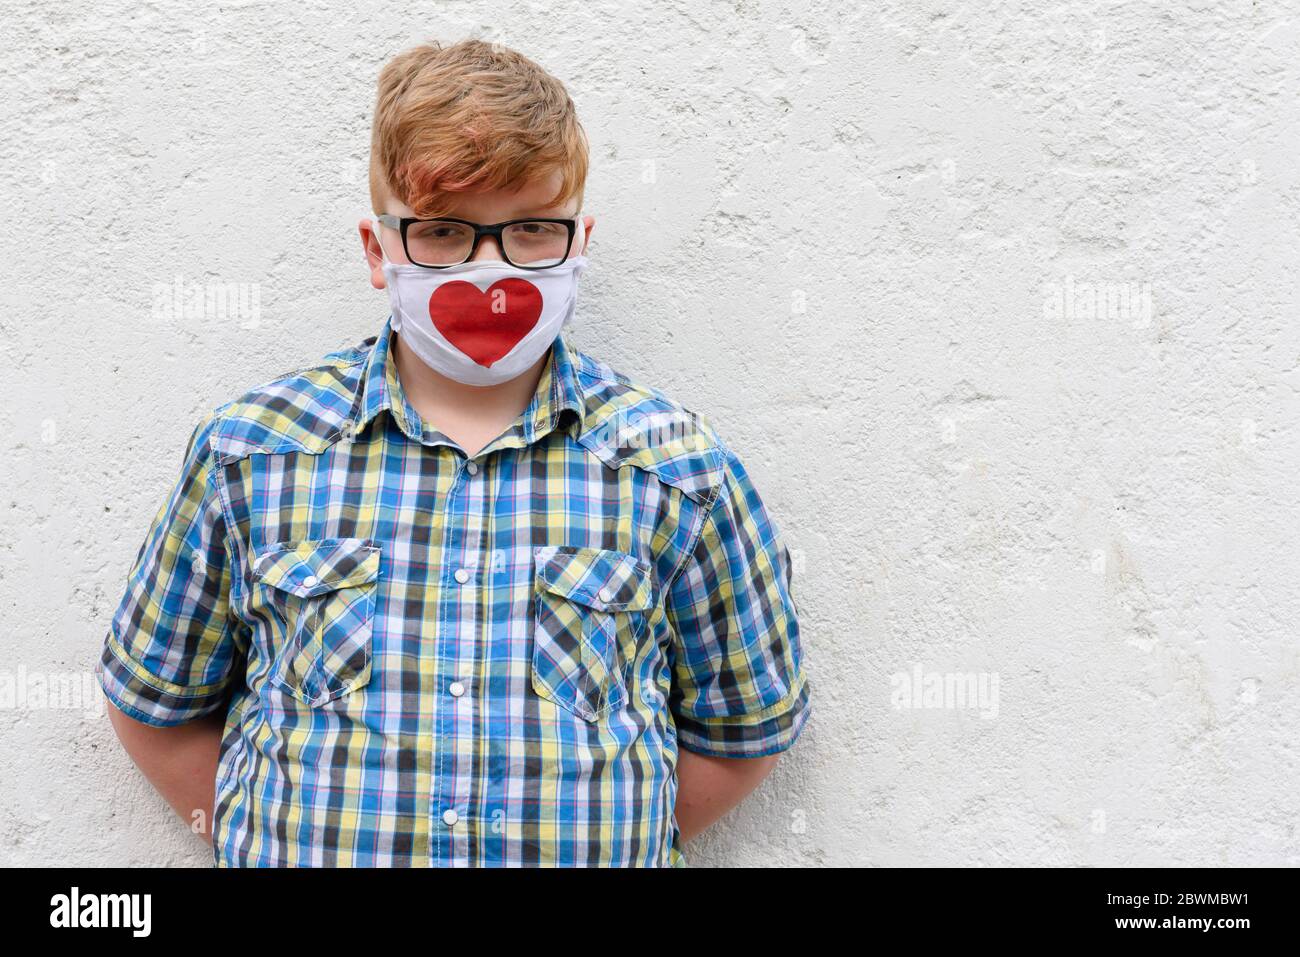 Red-haired boy with glasses and mask with printed red heart. A boy in a plaid shirt and surgical mask stands against a wall background. Stock Photo